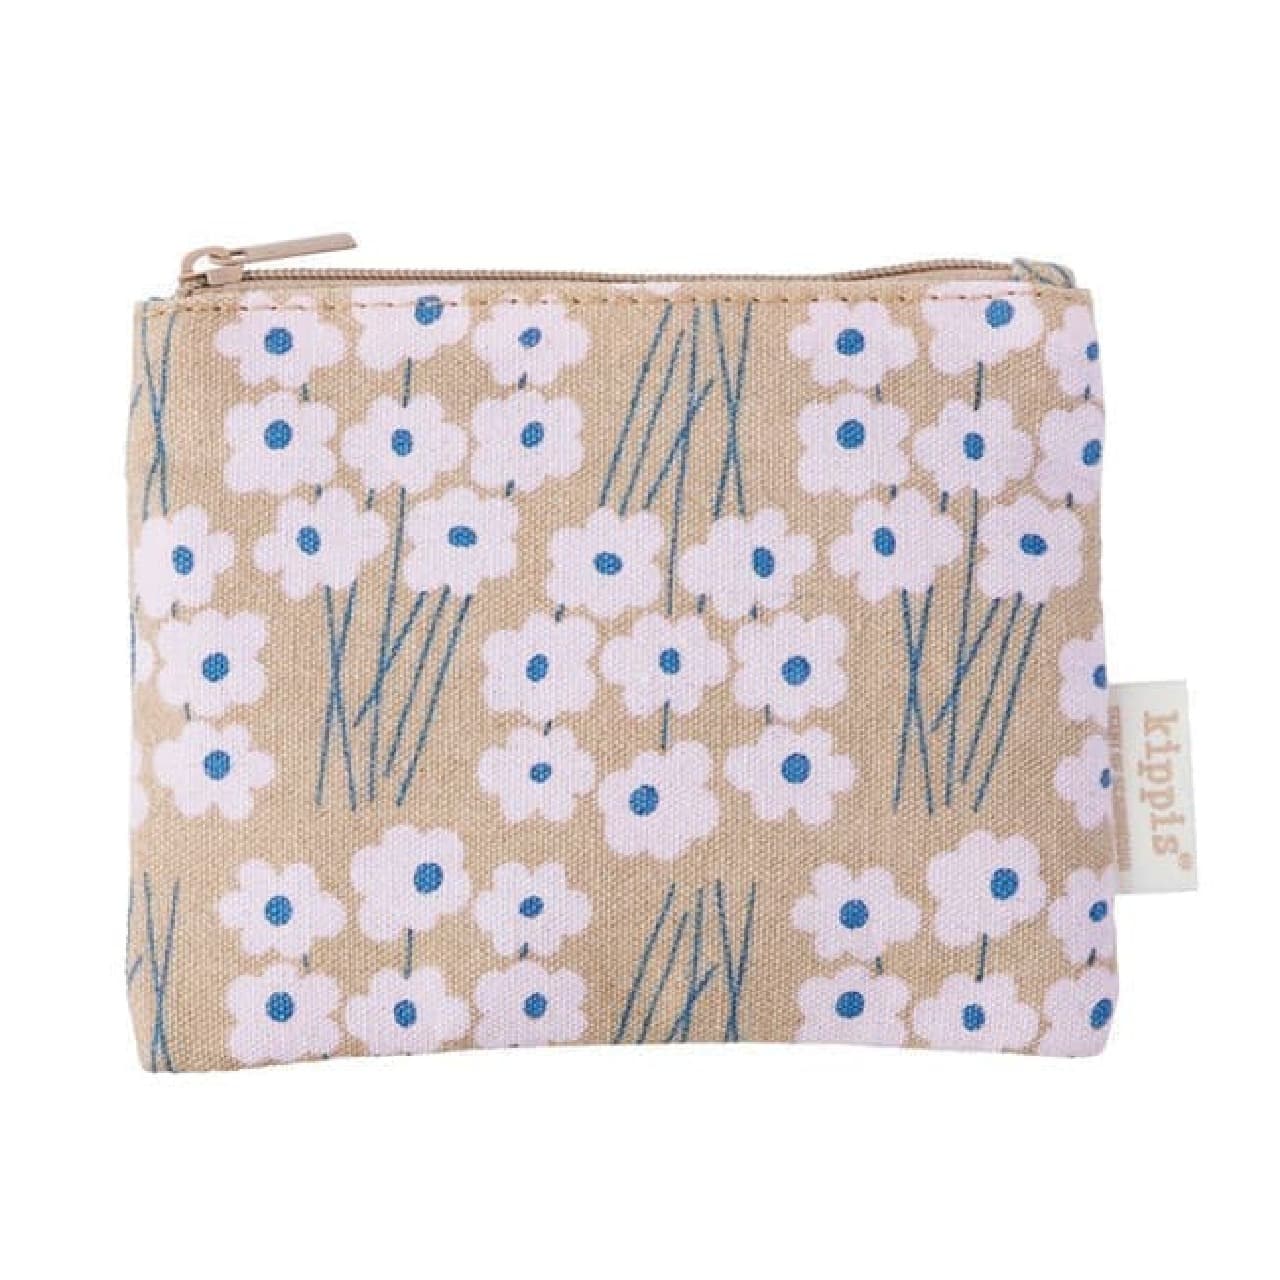 Scandinavian pattern pouch is added to the September issue of "Linen" --Cosmetics, IC cards, etc. are stored